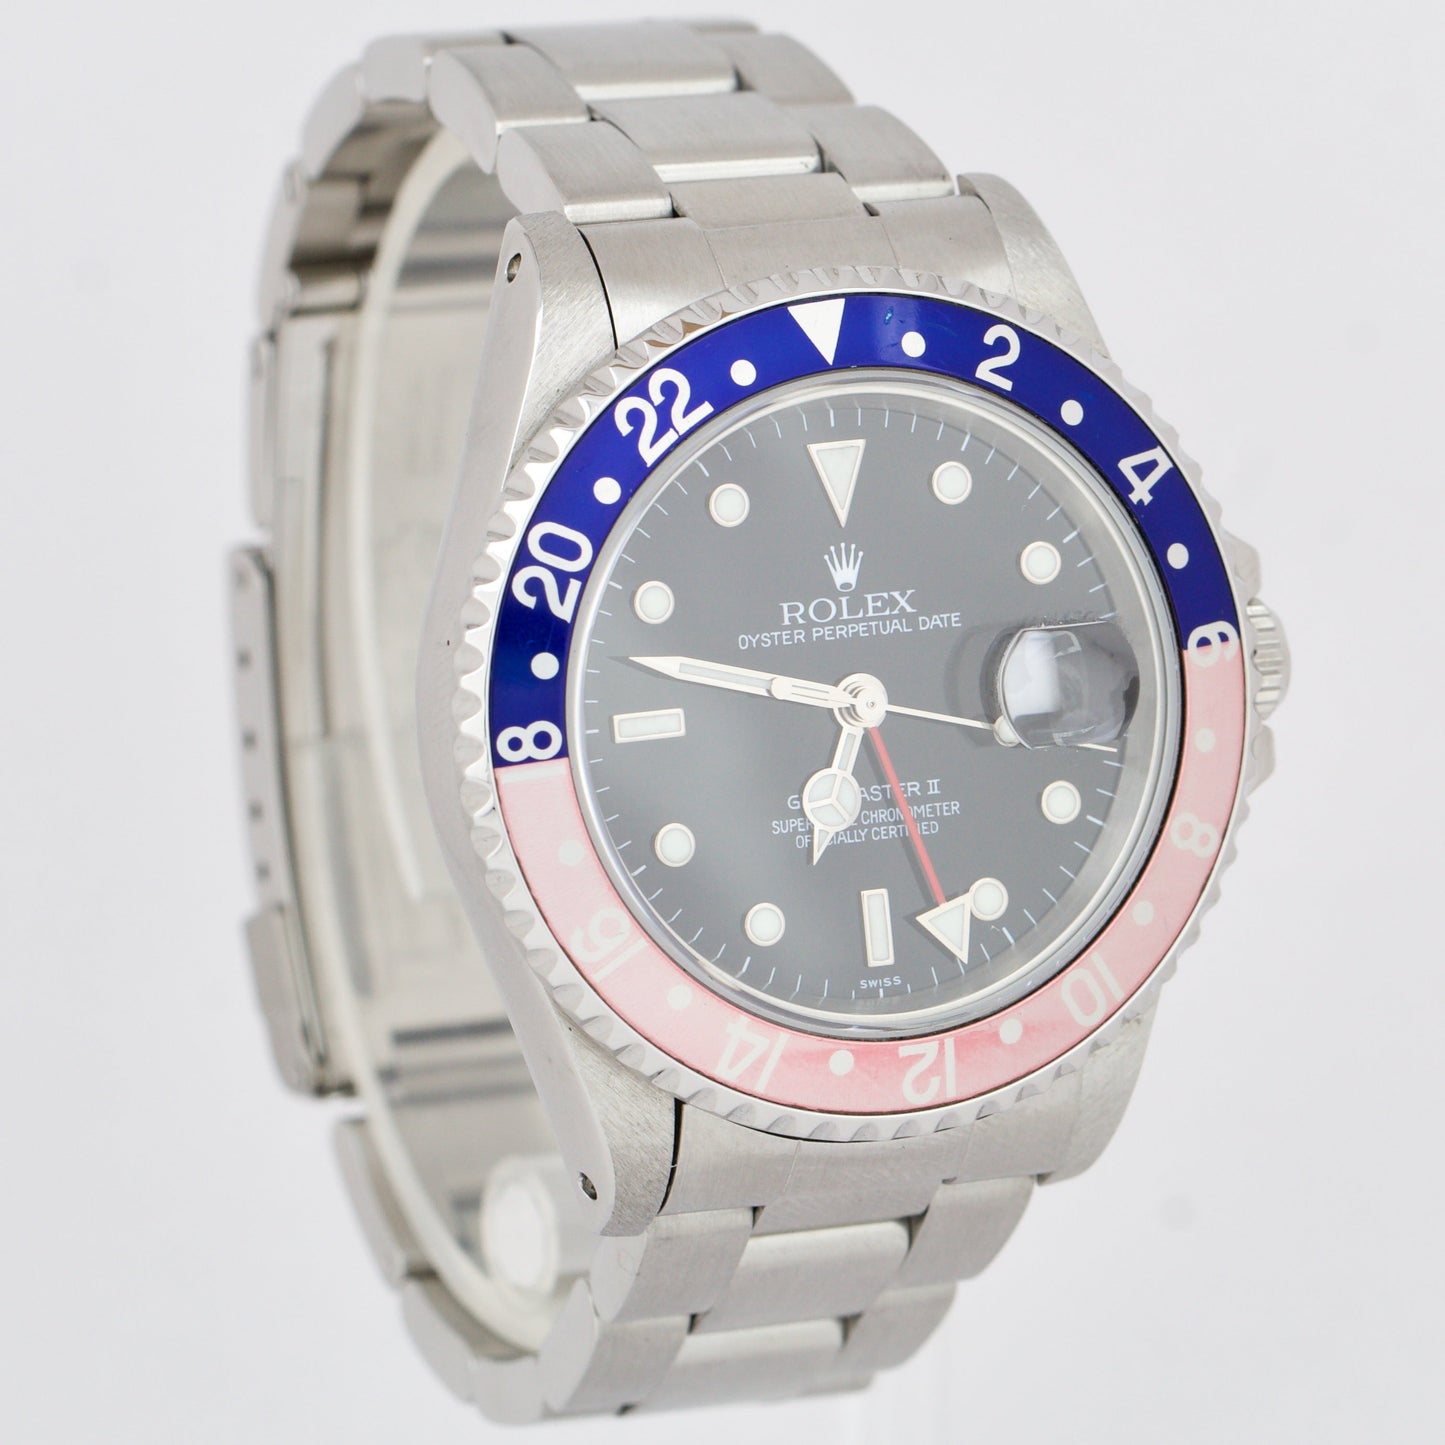 Rolex GMT-Master II PEPSI Blue Red SWISS ONLY Stainless 40mm 16710 Date Watch